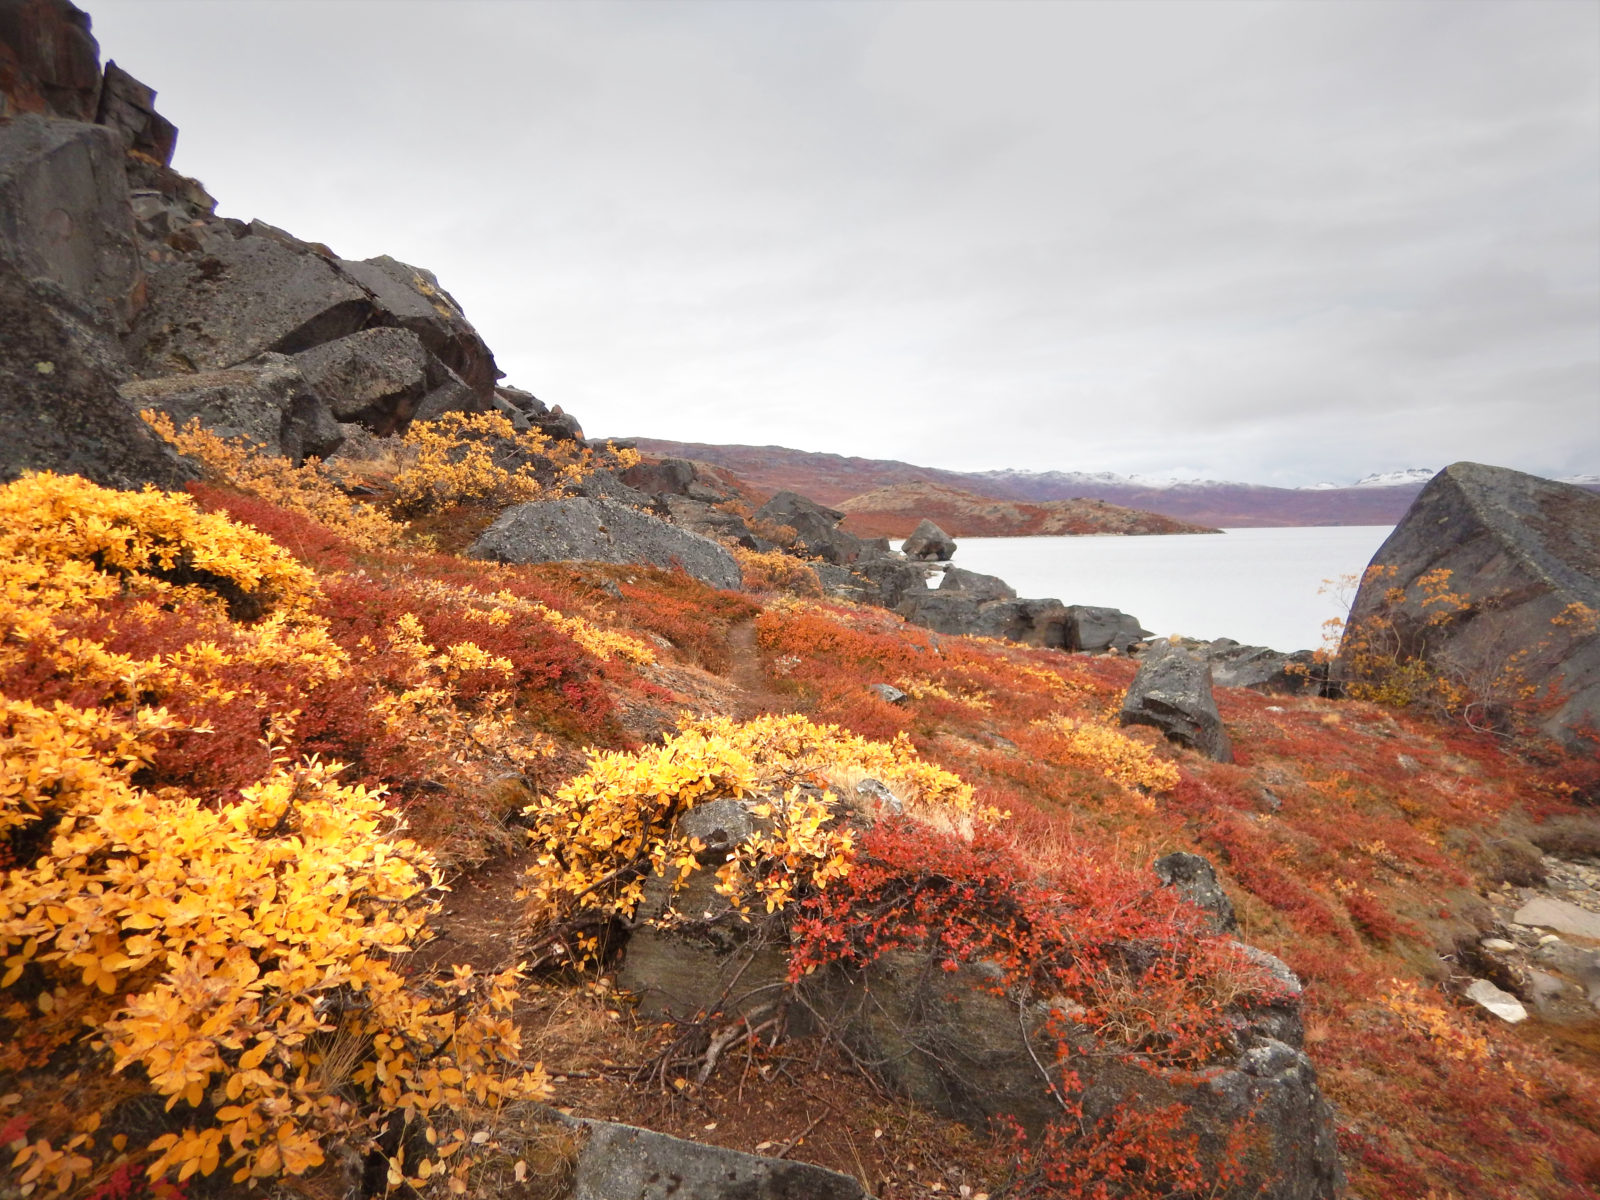 The Arctic Circle Trail winding its way through the colourful autumn / fall vegetation under overcast skies